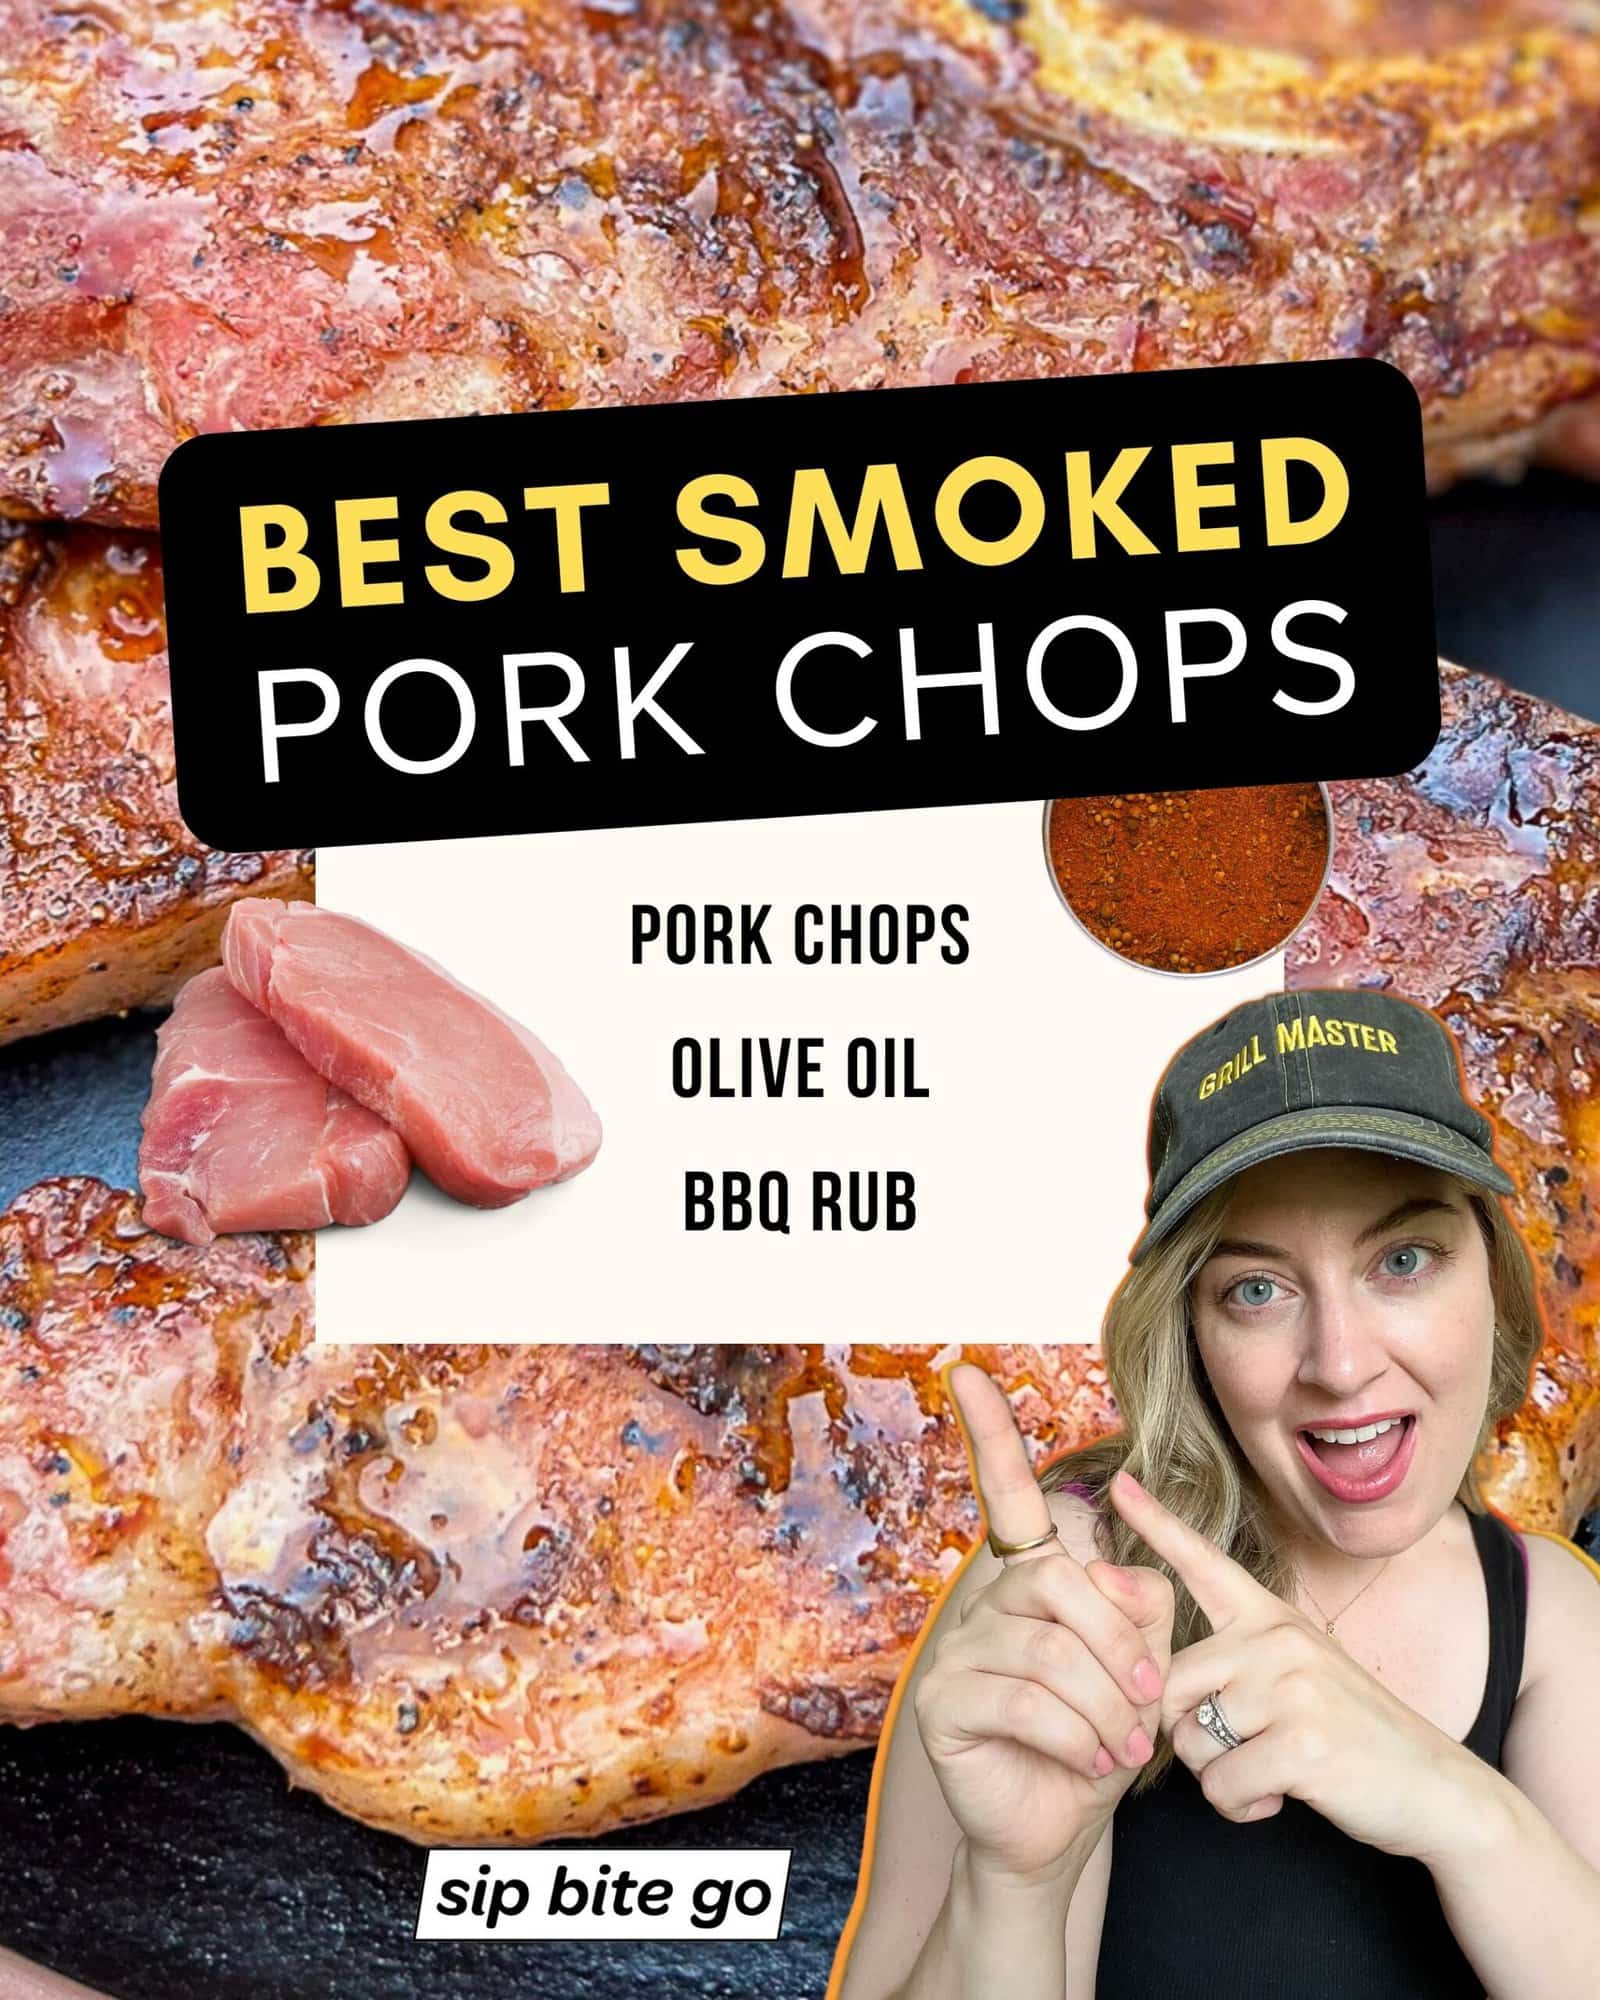 Infographic with ingredients for smoking pork chops bone in on the Traeger pellet grill with captions and images of food